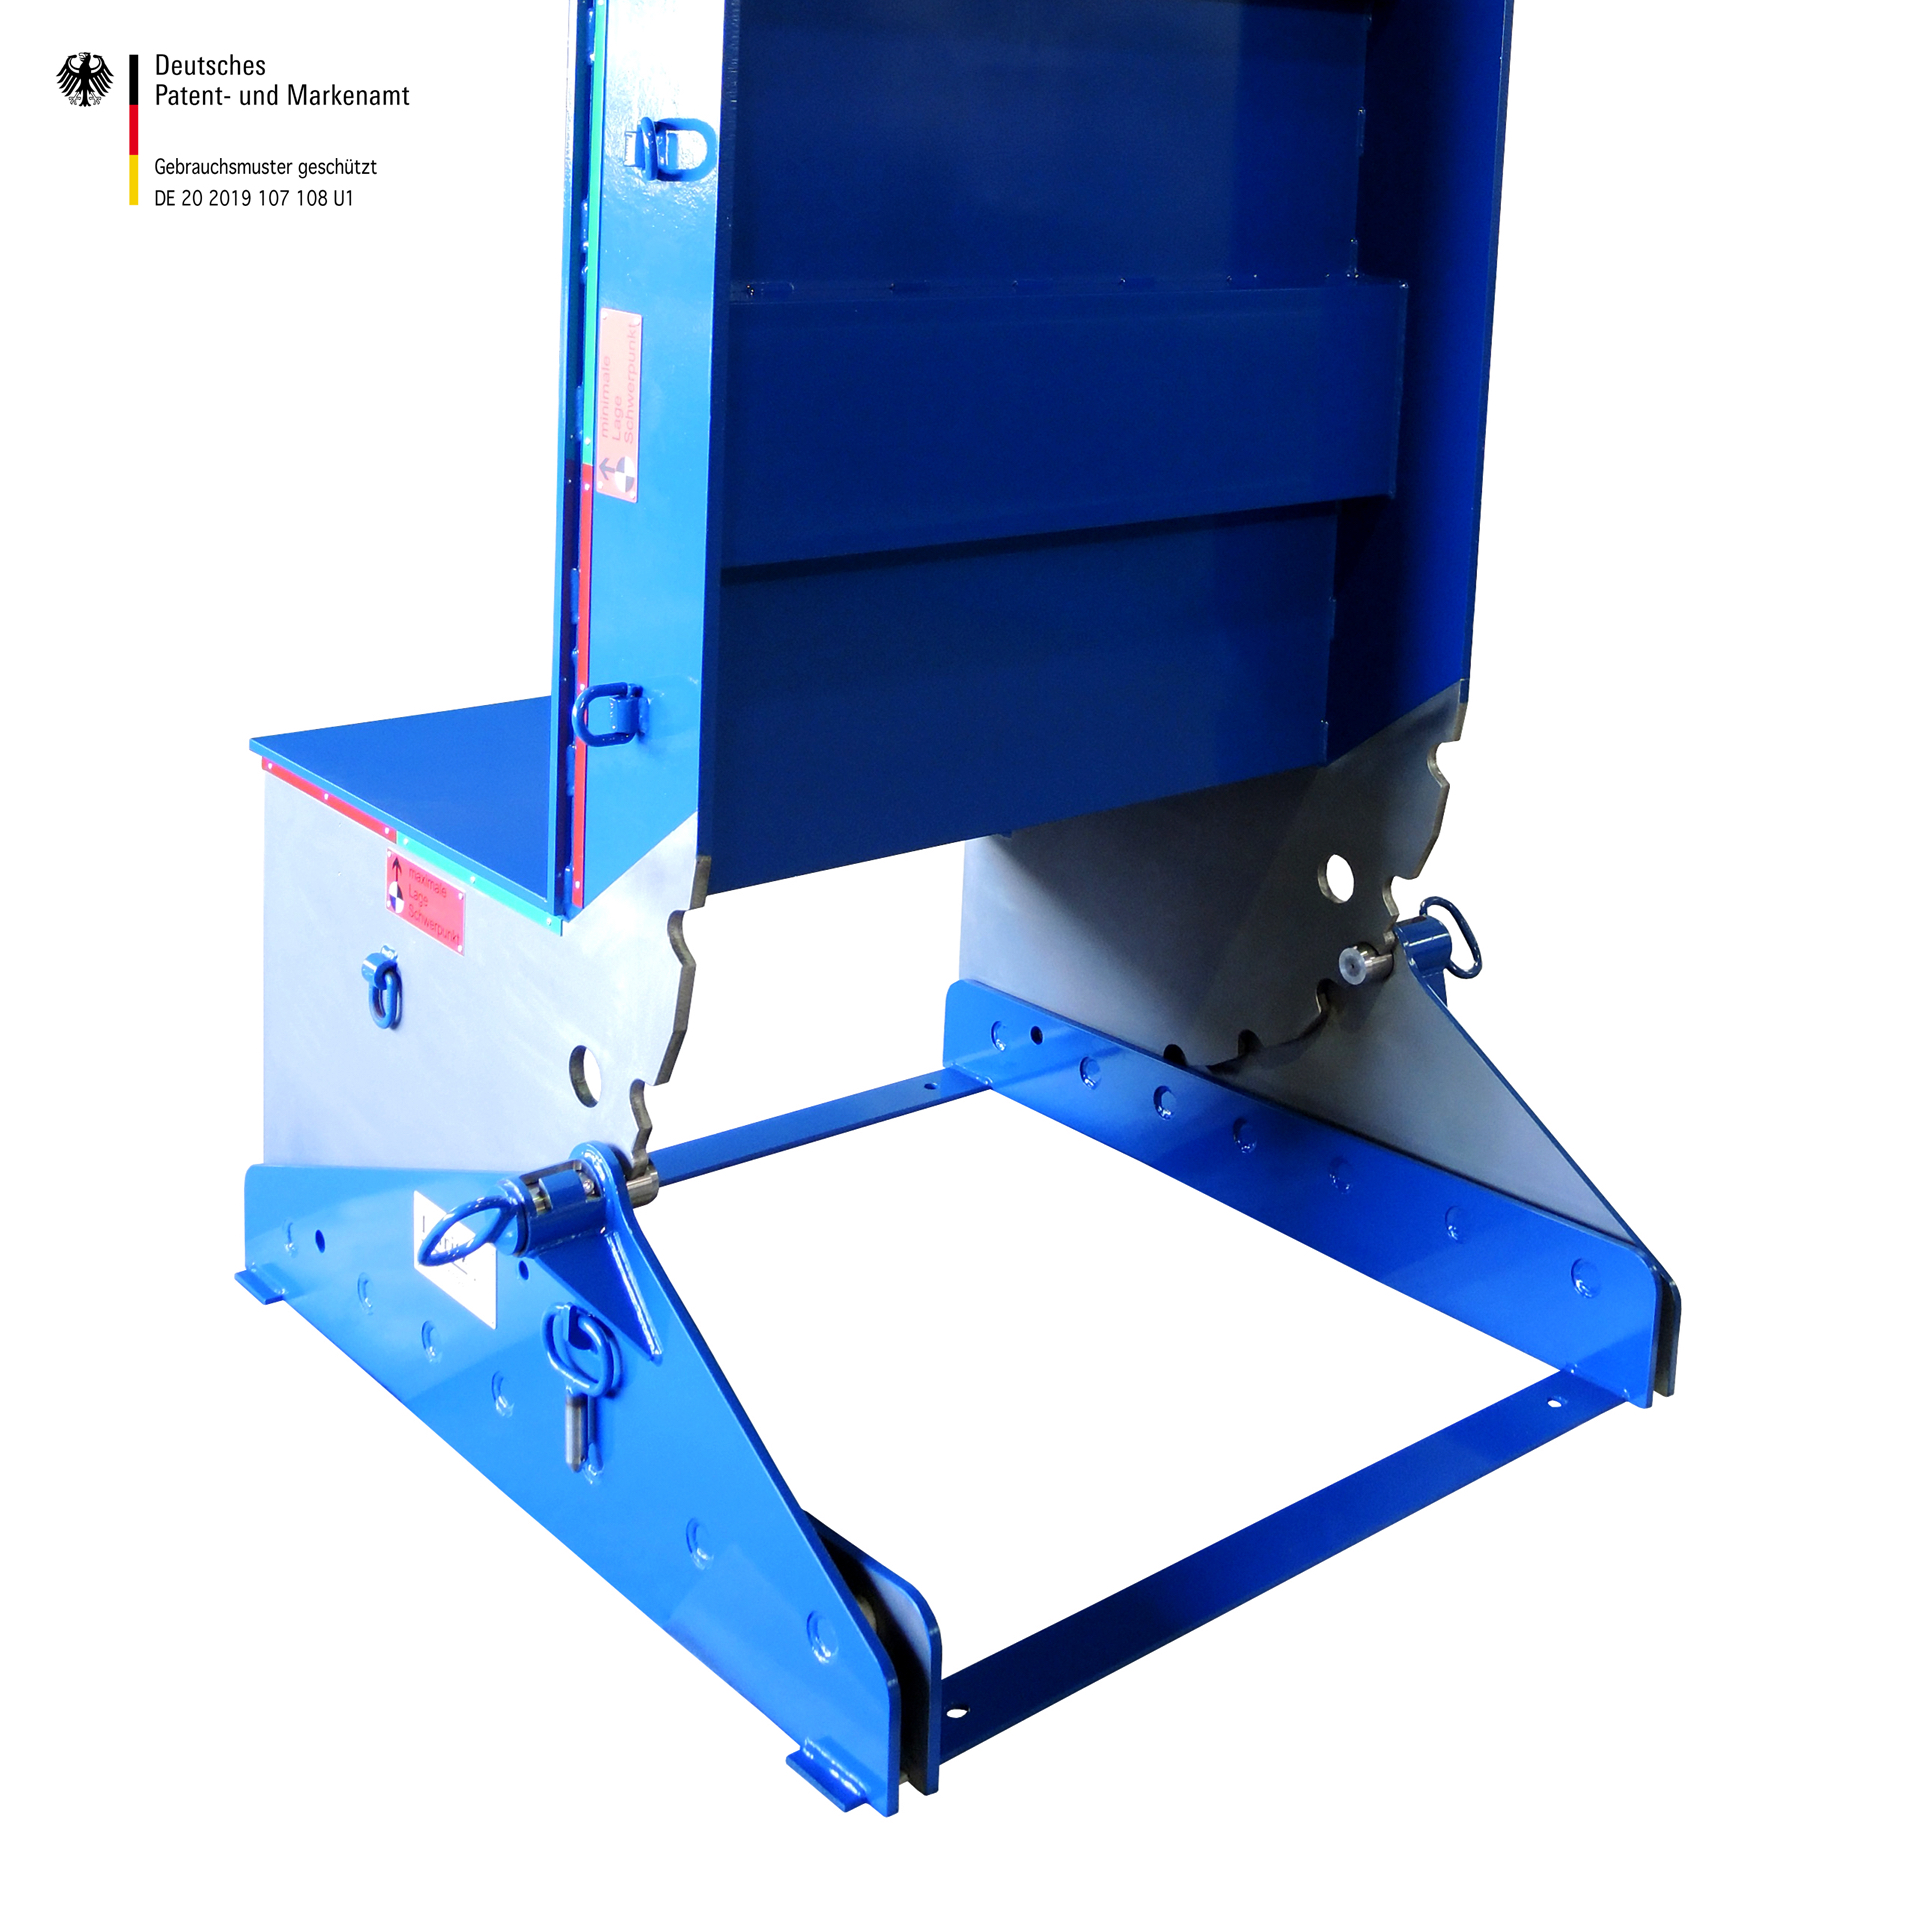 TOOL-MOVER blue from Leiritz.